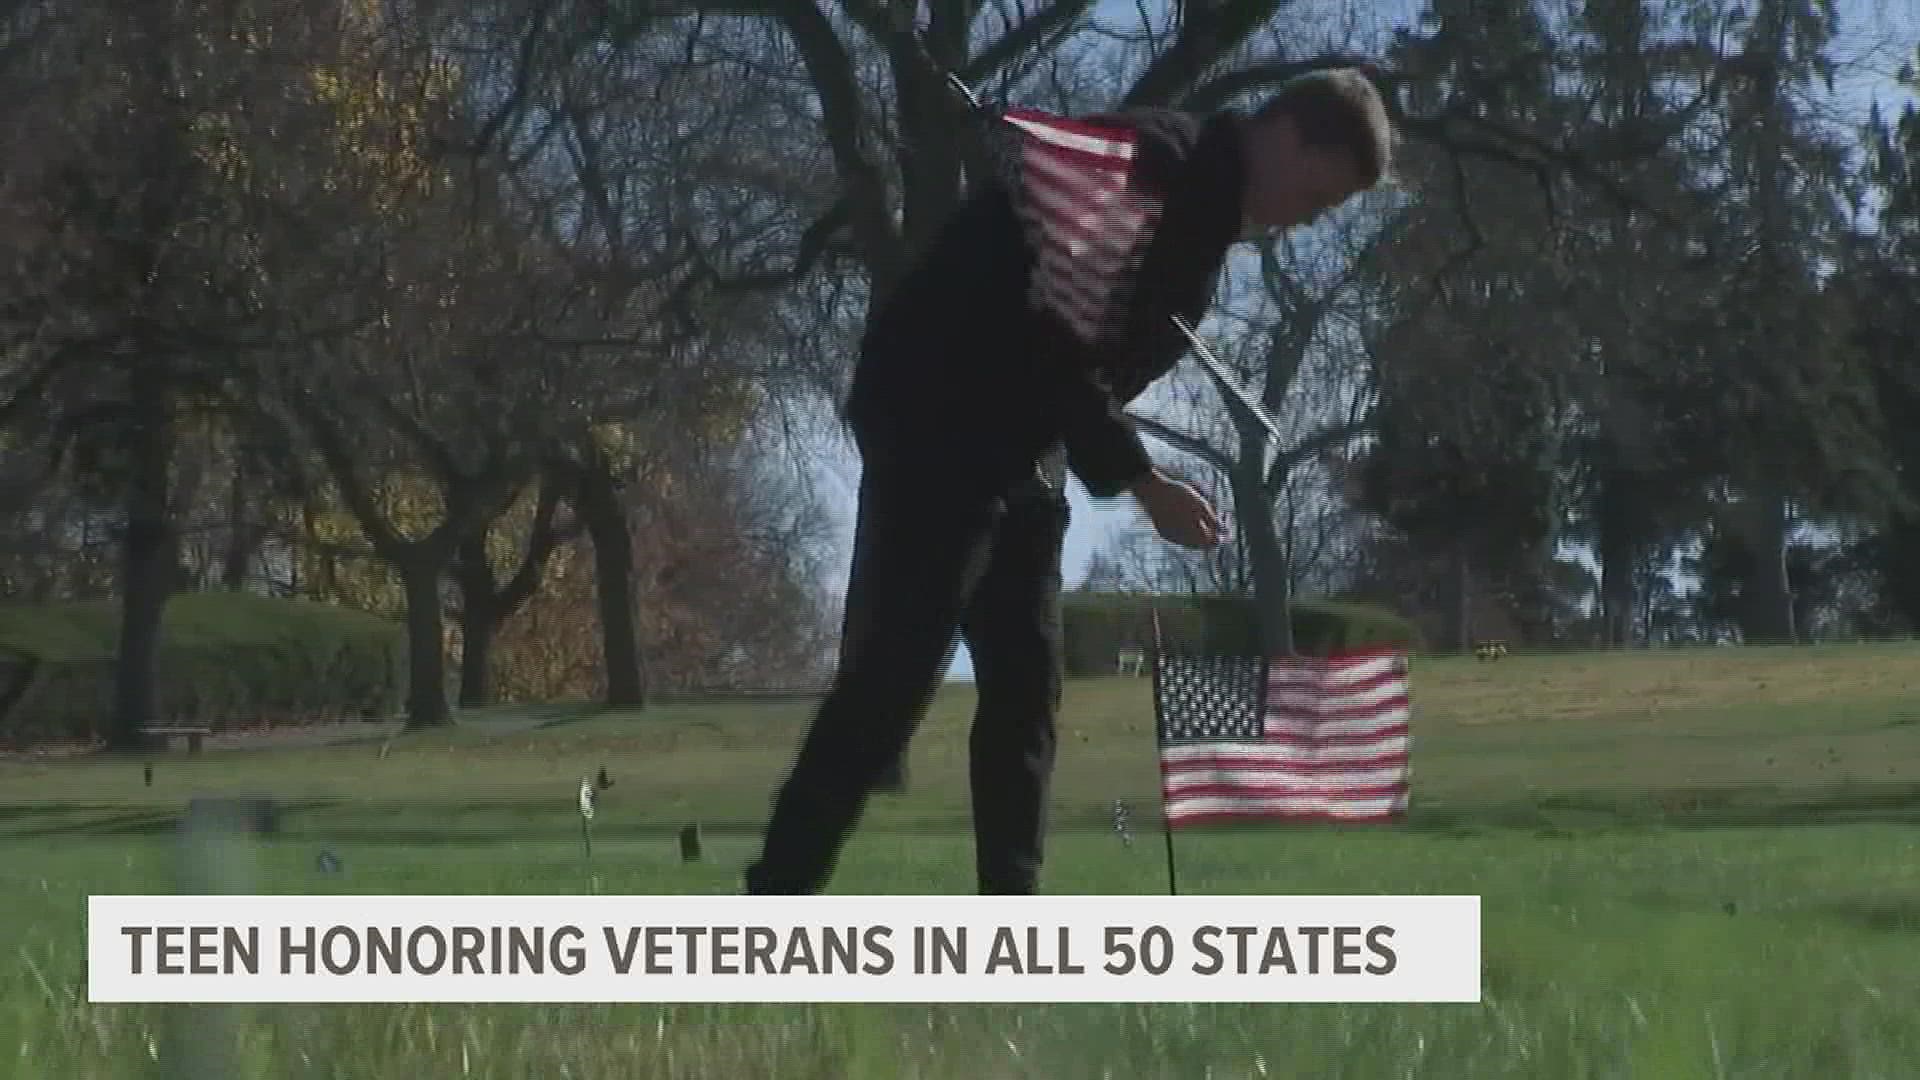 A 17-year-old California native is on a roadtrip to honor veterans in all 50 states.